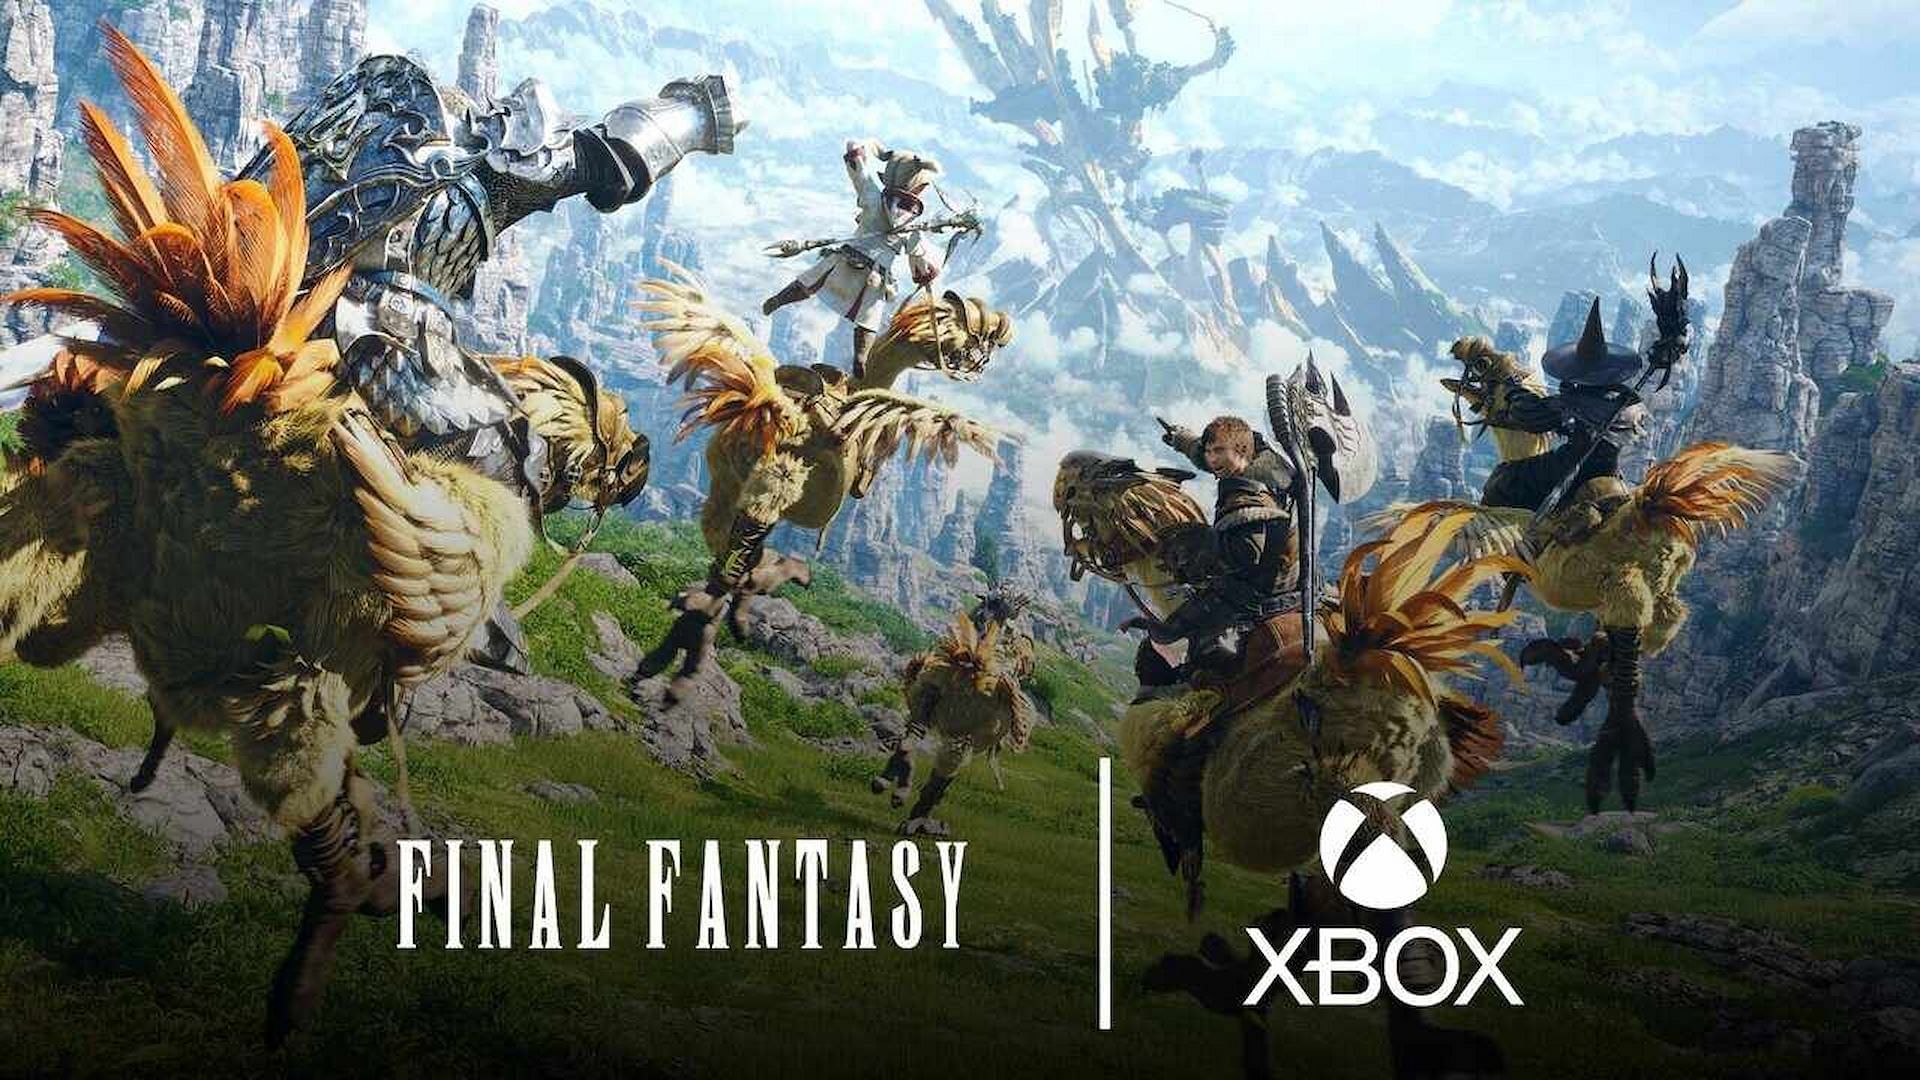 Final Fantasy XIV finally coming to Xbox after PC, PlayStation. Release  date, other details of video game - The Economic Times